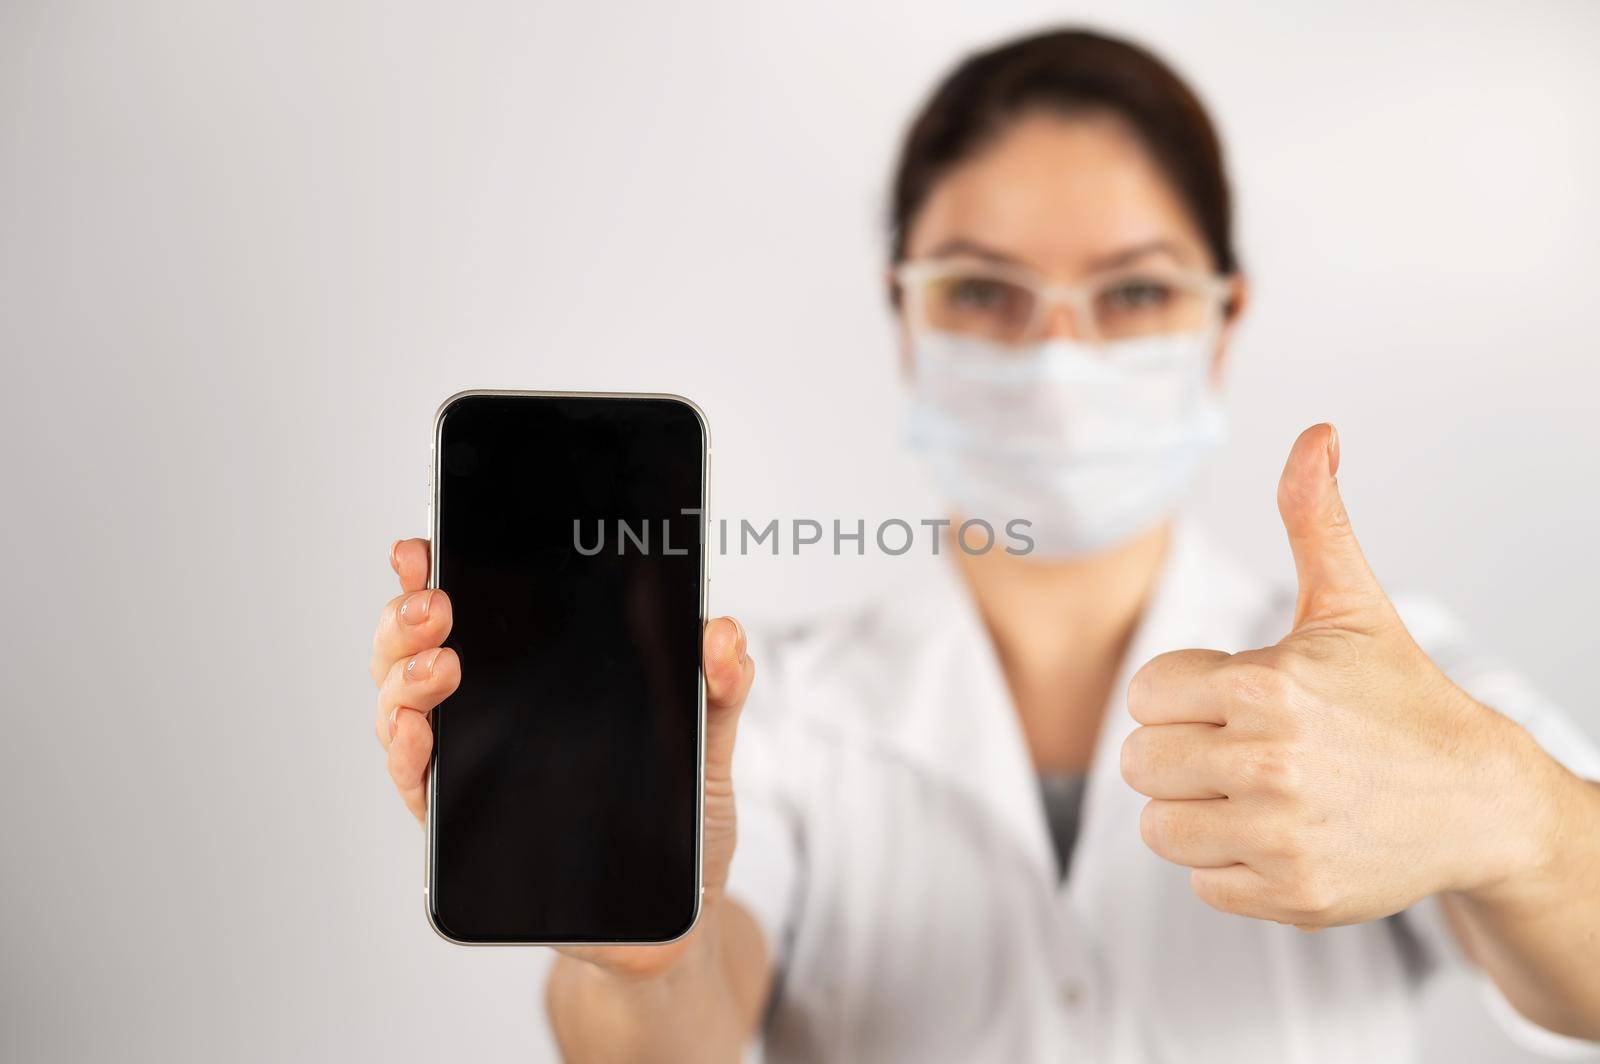 The doctor holds a smartphone with a black screen on a white background. by mrwed54